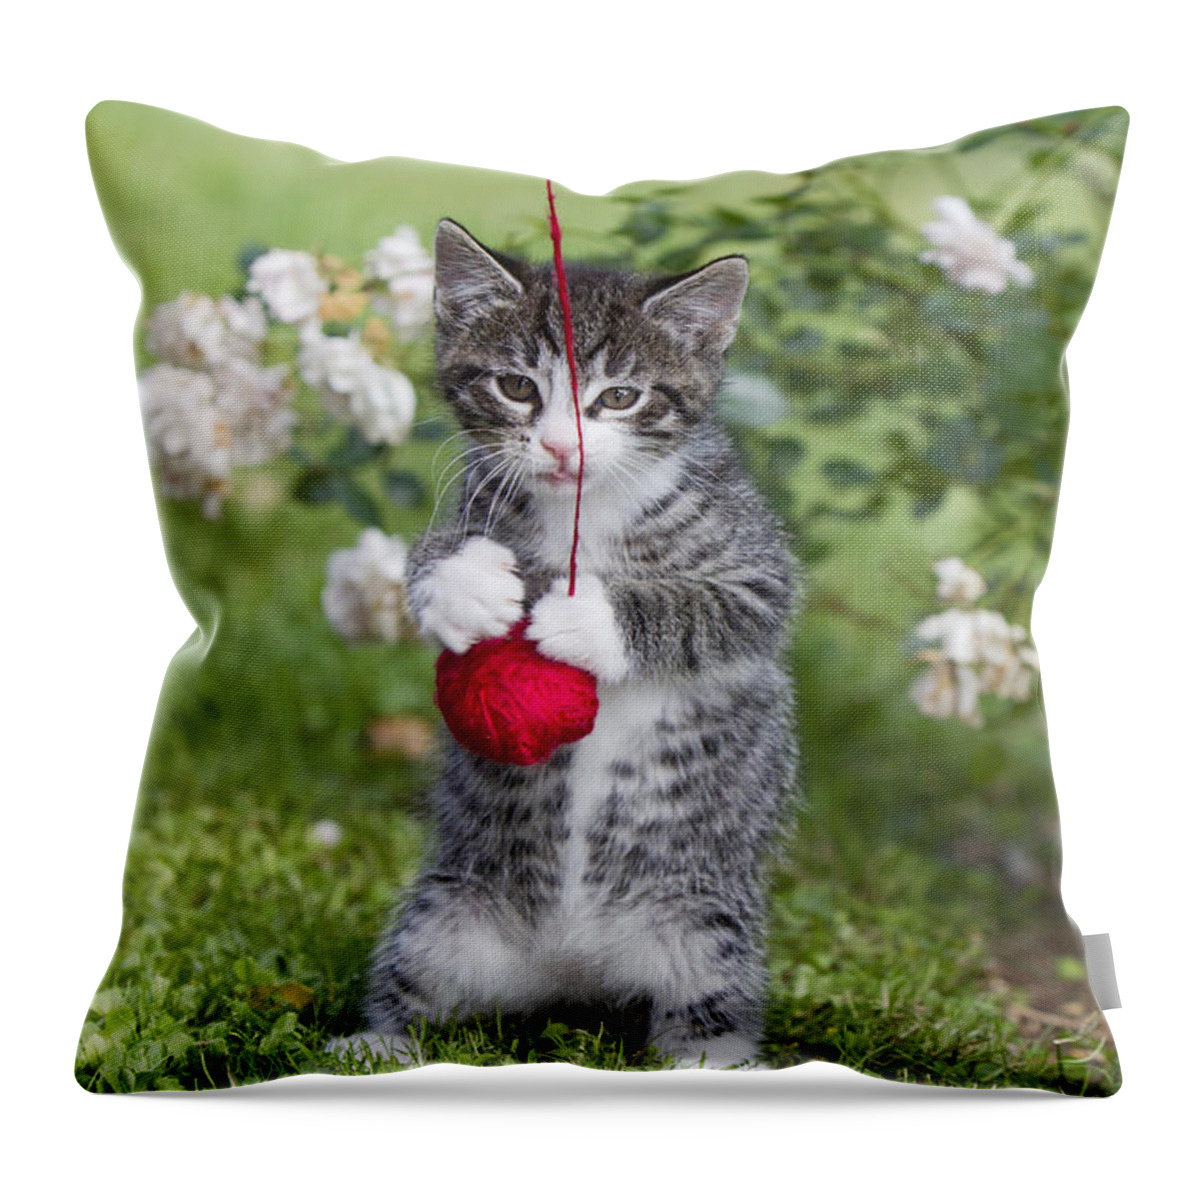 Feb0514 Throw Pillow featuring the photograph Tabby Kitten Playing With Ball Of Wool #1 by Duncan Usher